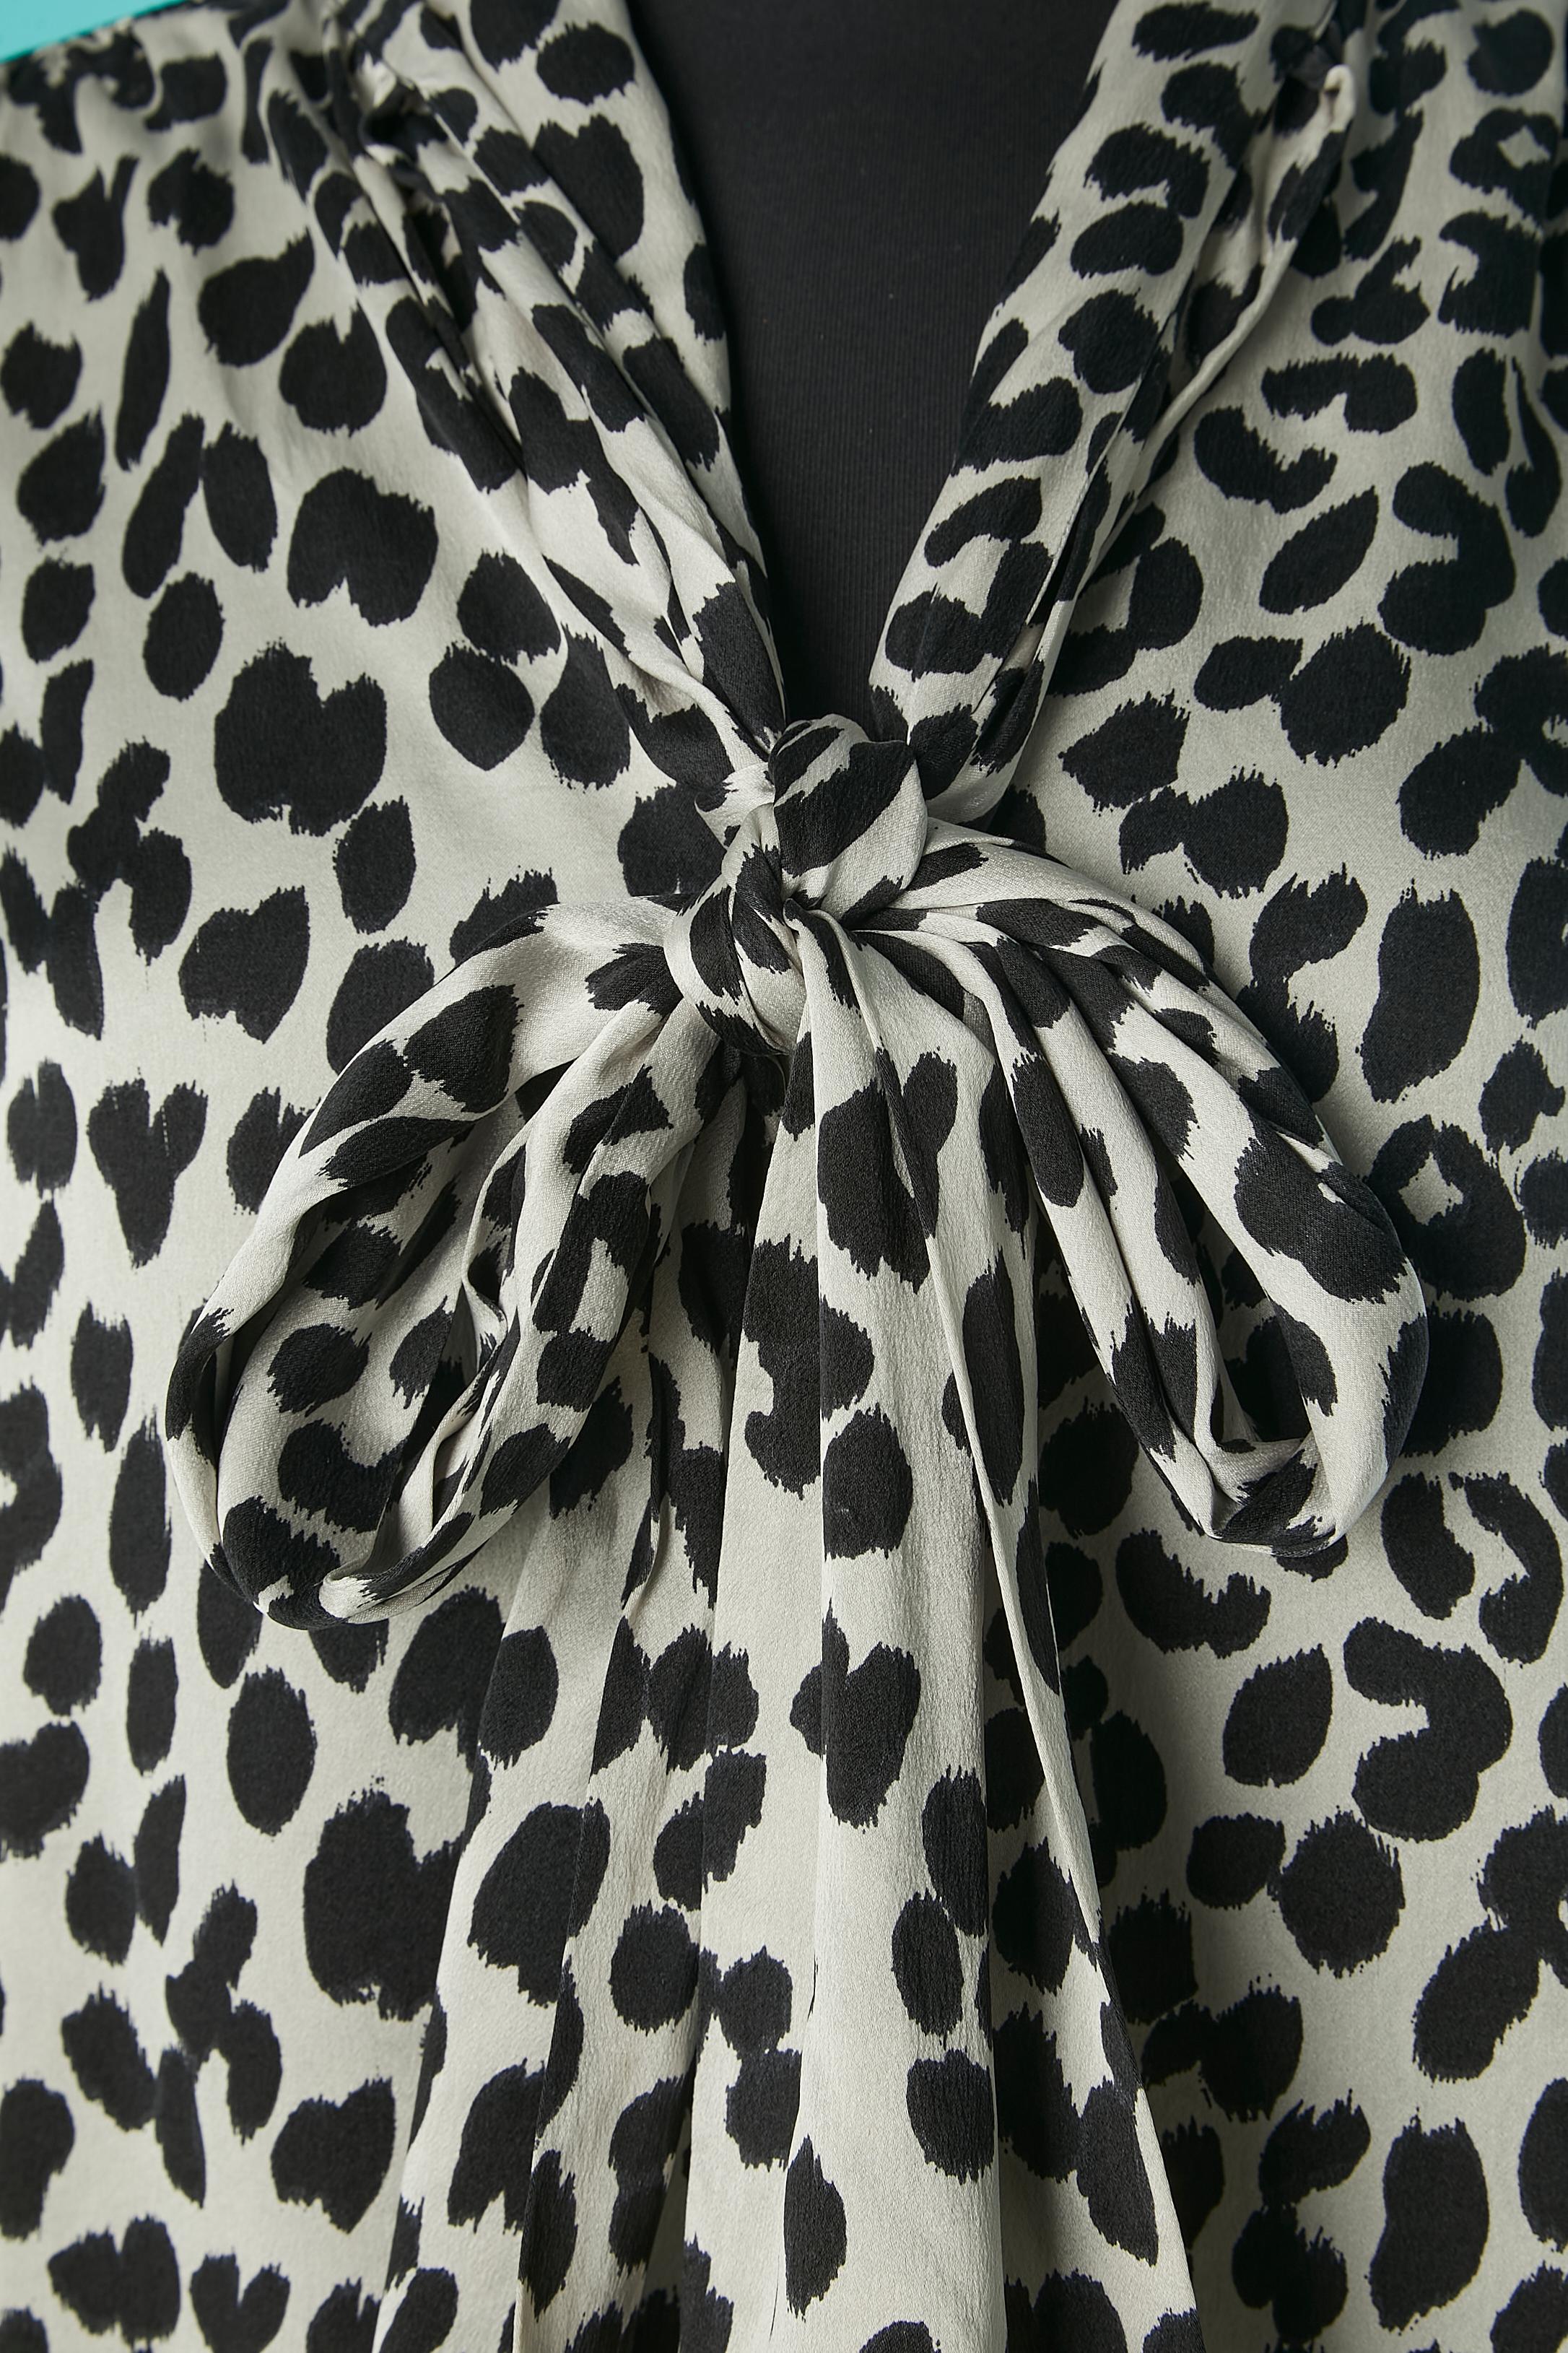 Silk blouse with bow tie and animal print. 
One button and buttonhole on the cuffs. 
SIZE 36 (Fr) M 